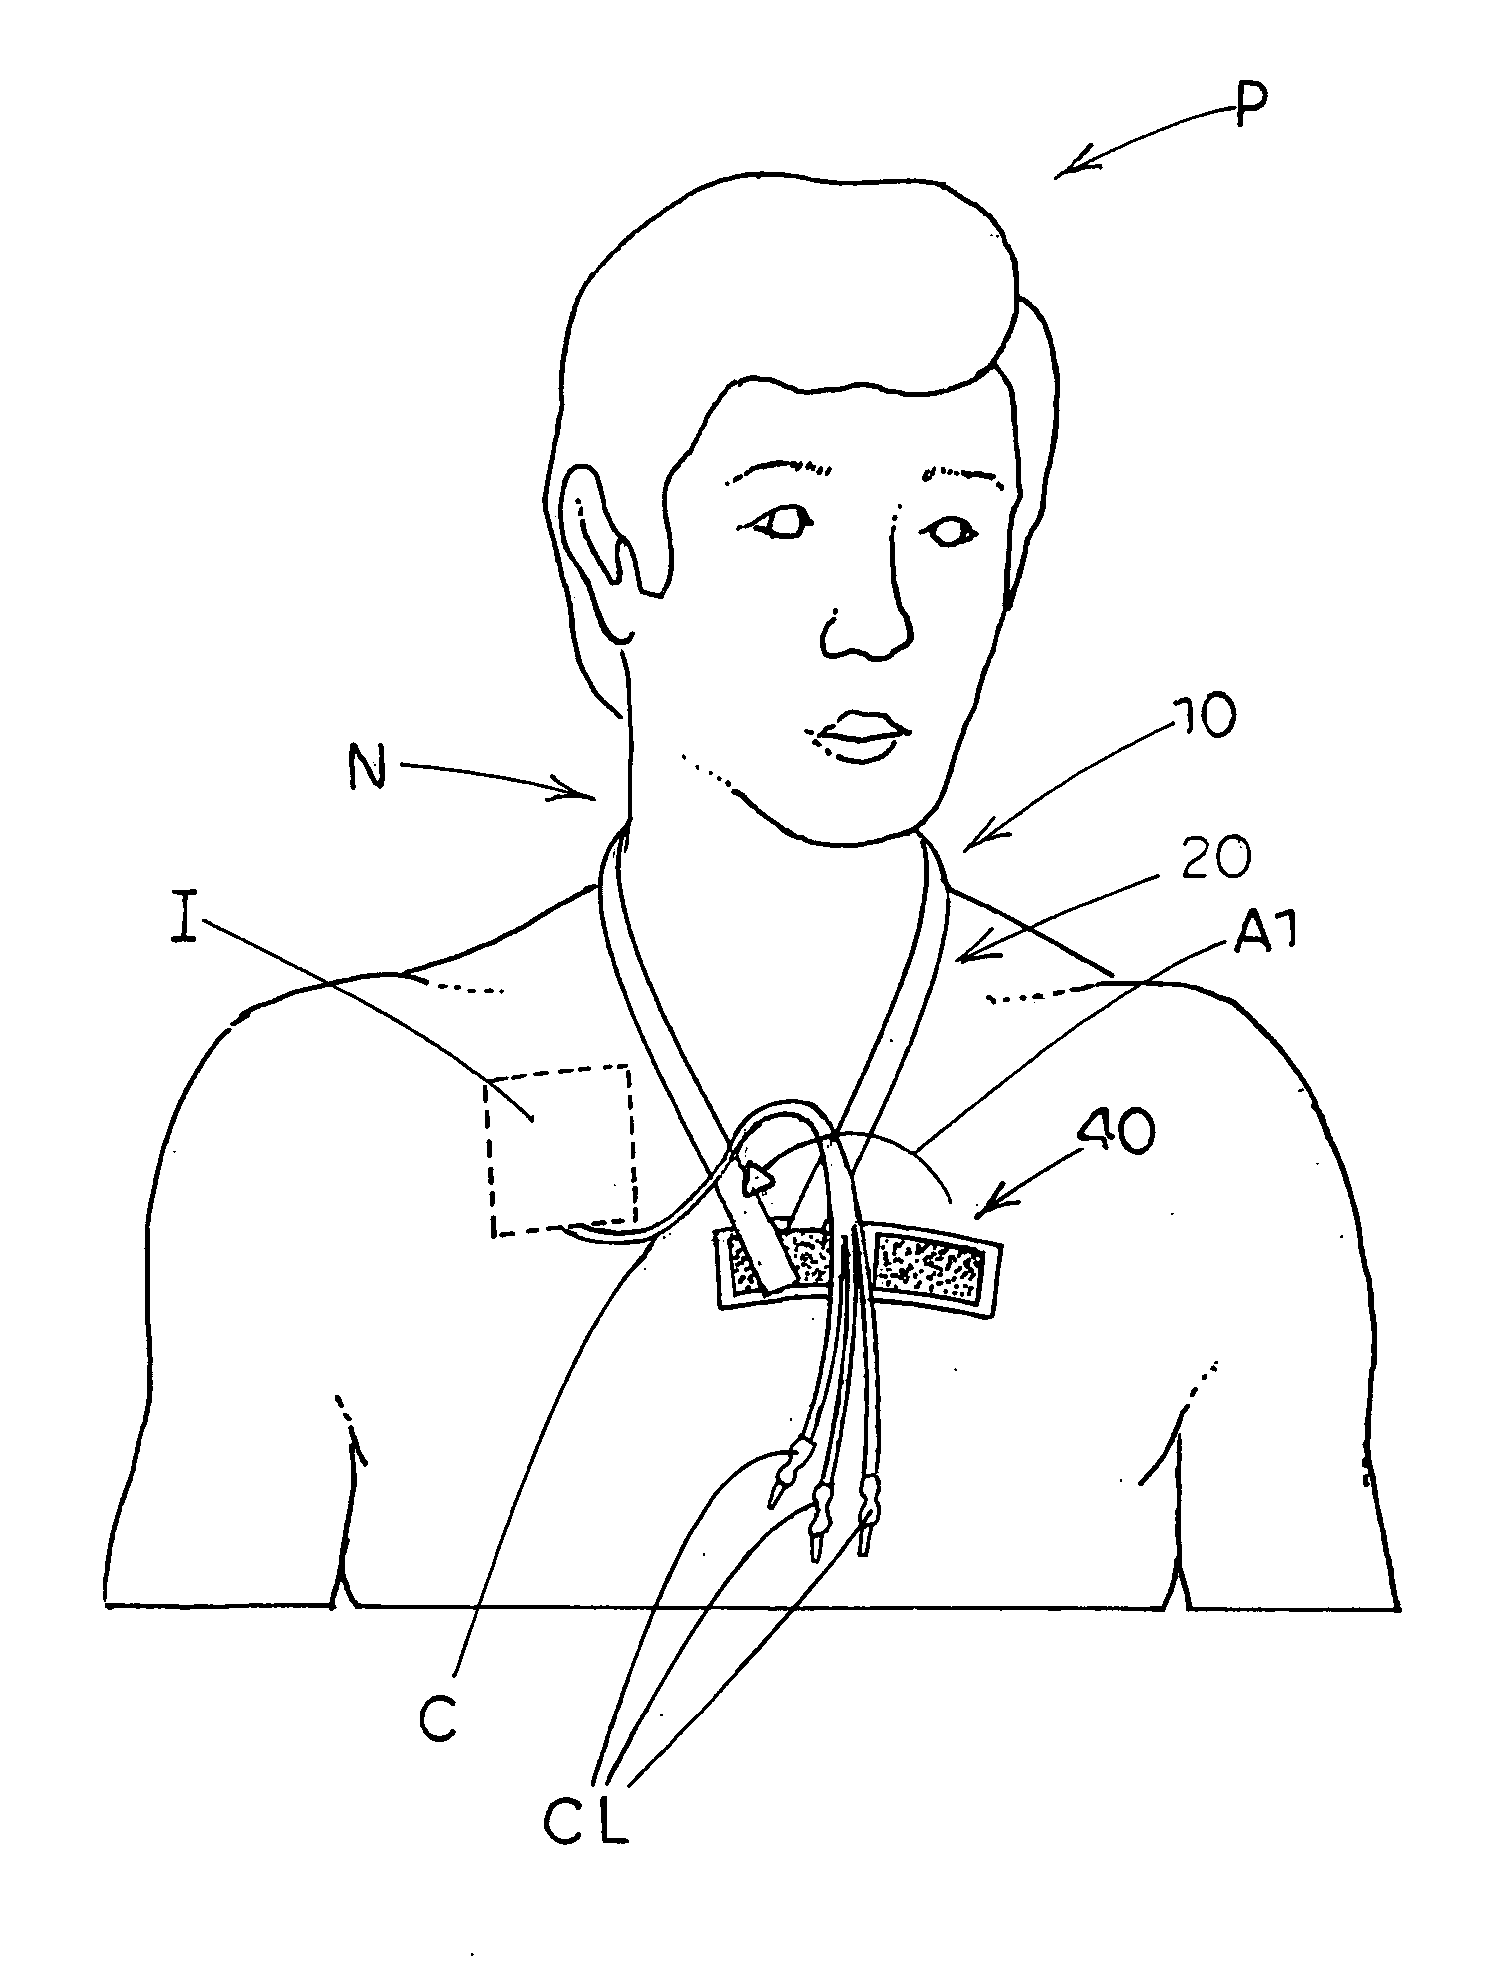 Catheter support apparatus and method